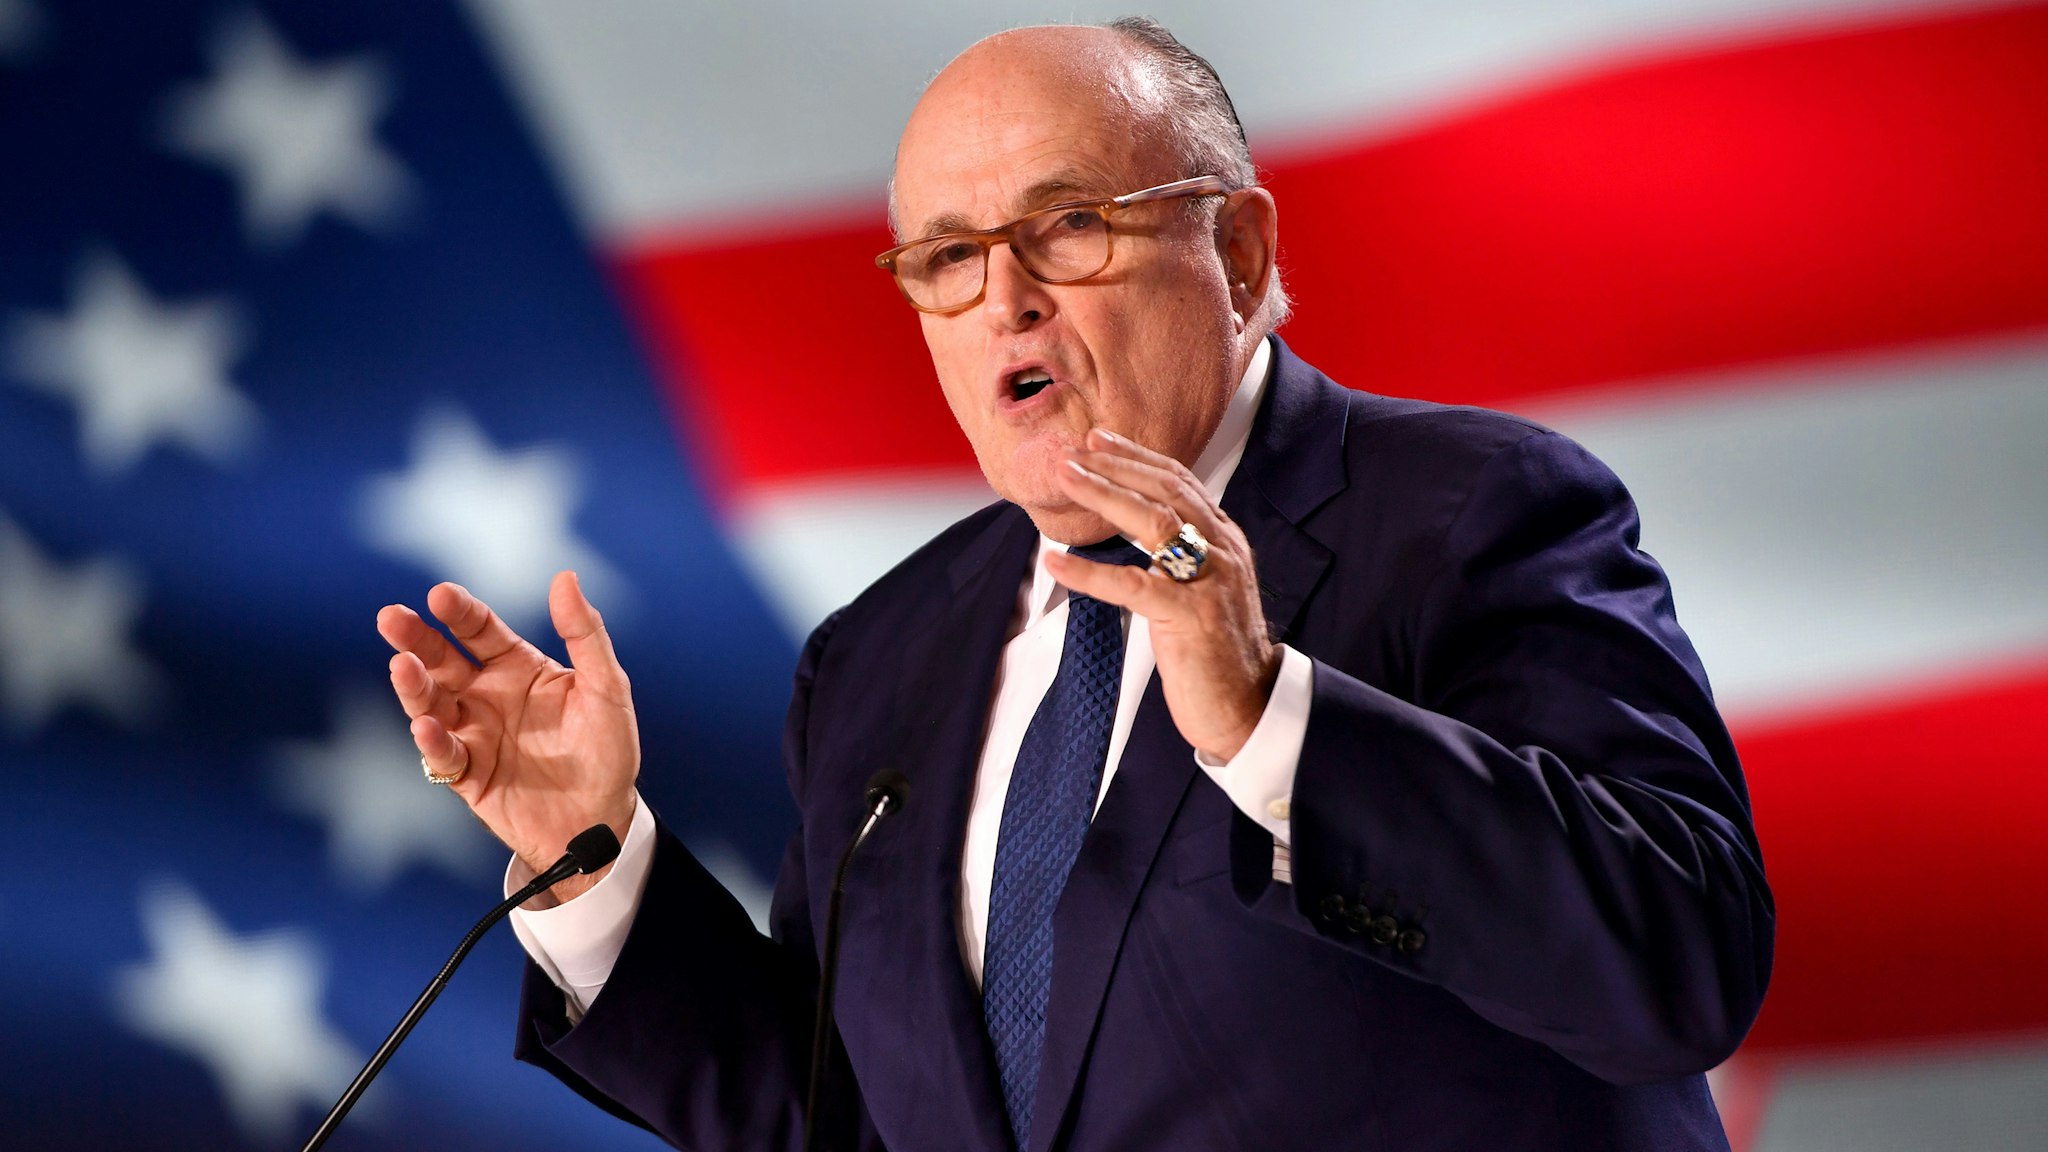 Former Mayor of New York Rudolph Giuliani speaks during the Conference In Support Of Freedom and Democracy In Iran on June 30, 2018 in Paris, France. The speakers declared their support for the Iranian peoples uprising and the democratic alternative, the National Council of Resistance of Iran and called on the international community to adopt a firm policy against the mullahs regime and stand by the arisen people of Iran.